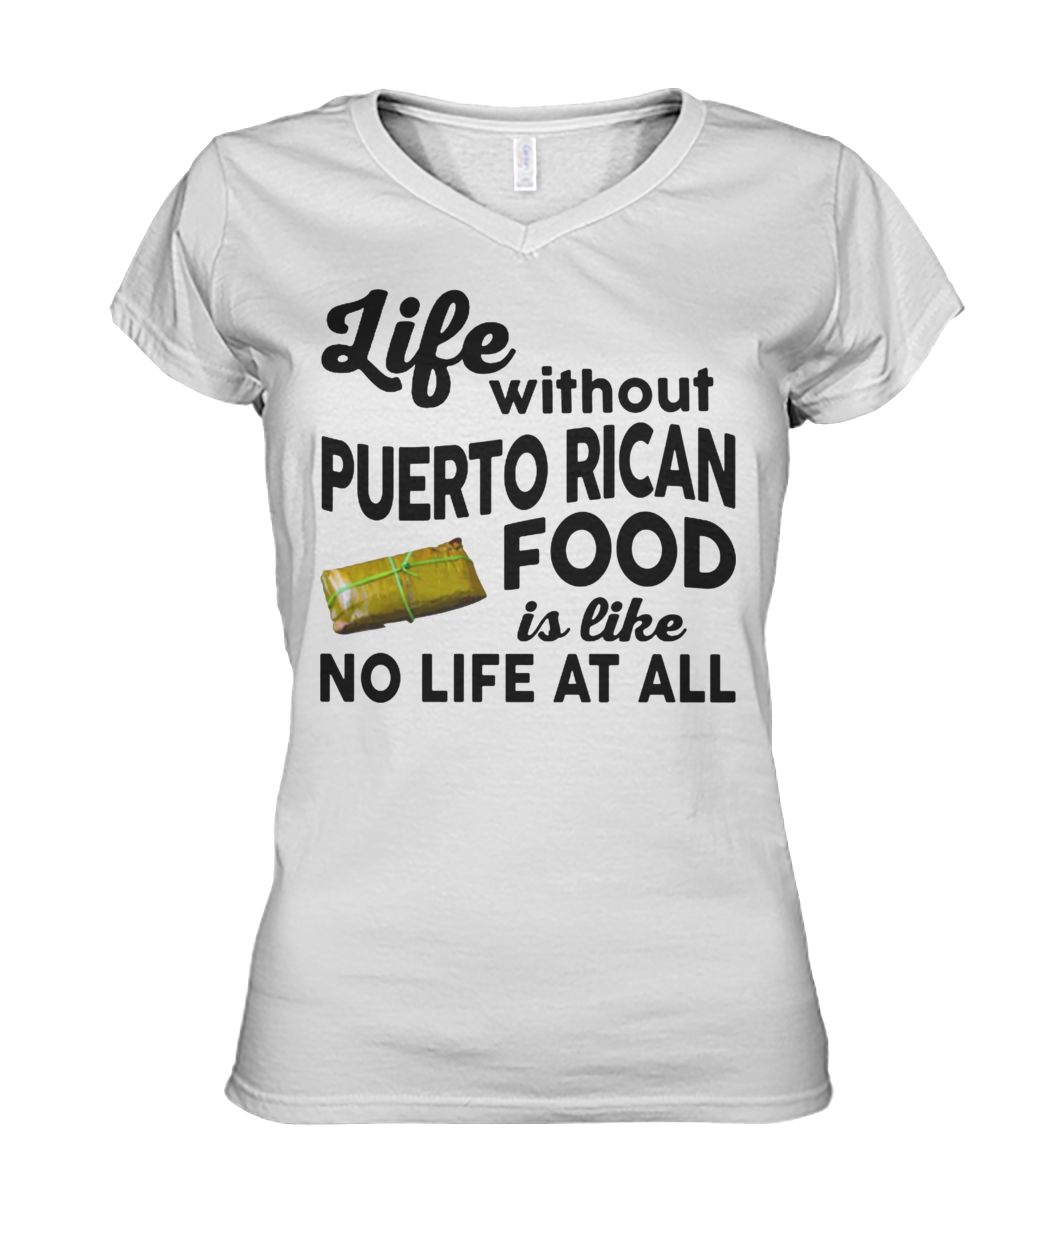 Life without puerto rican food is like no life at all women's v-neck